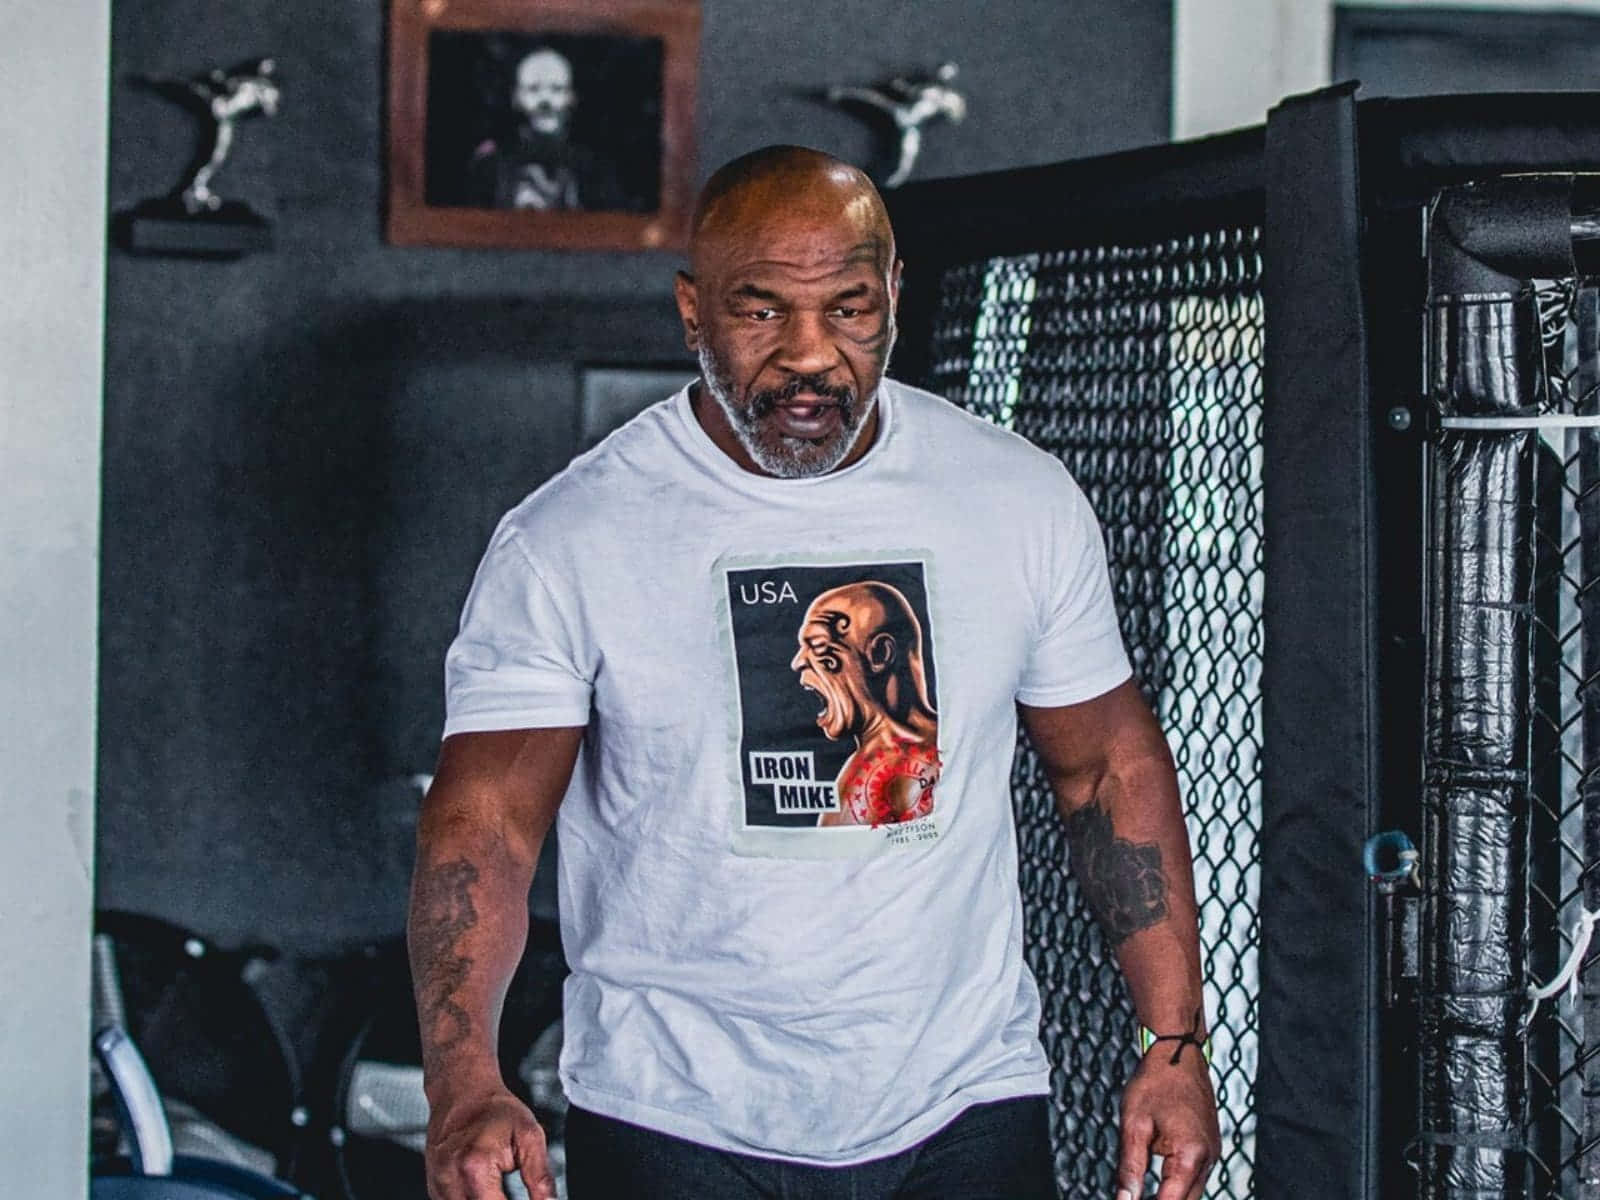 Mike Tyson in his prime, showcasing his fighting spirit and determination